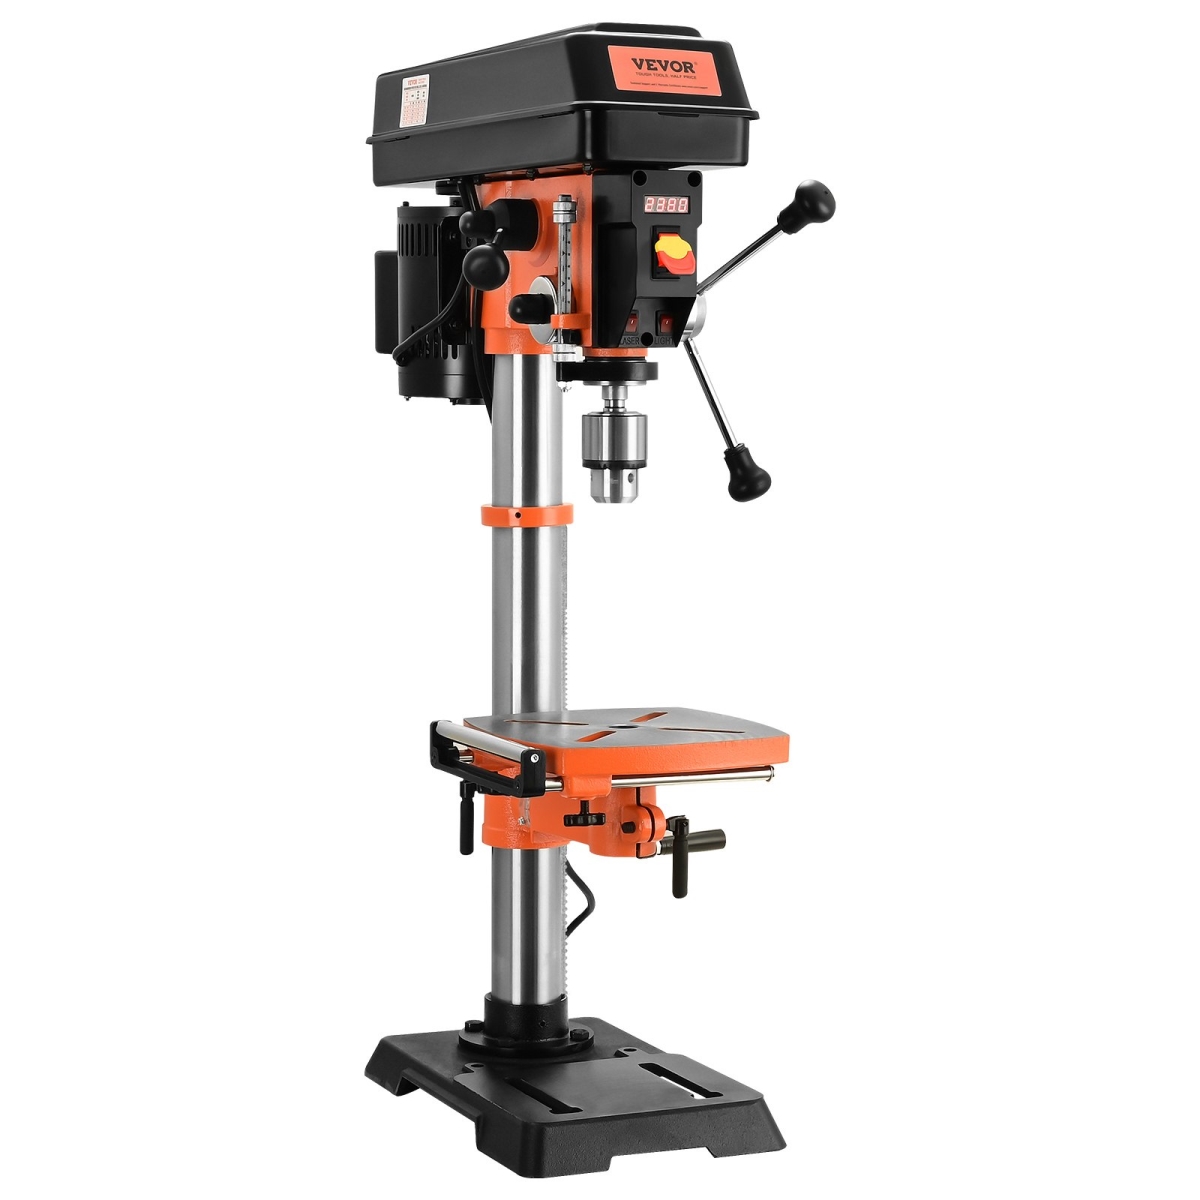 Picture of Vevor TSZCBS50A12MIPNMTV1 12 in. 5A 120V Variable Speed Cast Iron Benchtop Drill